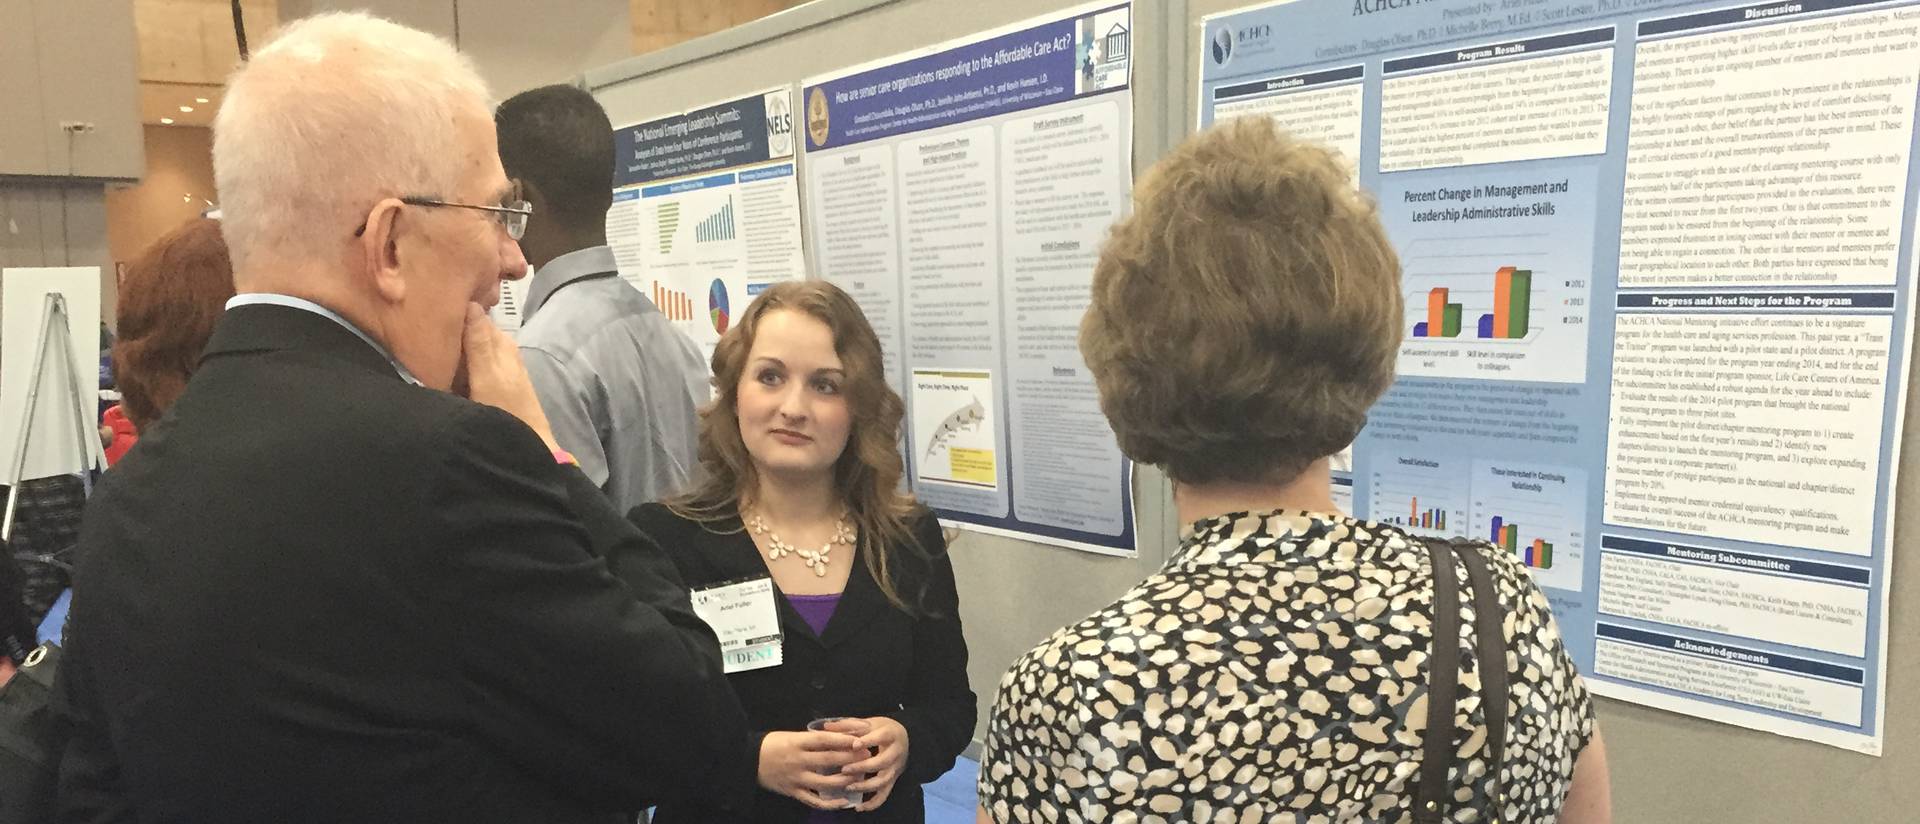 A health care administration student explaining her research project to others.